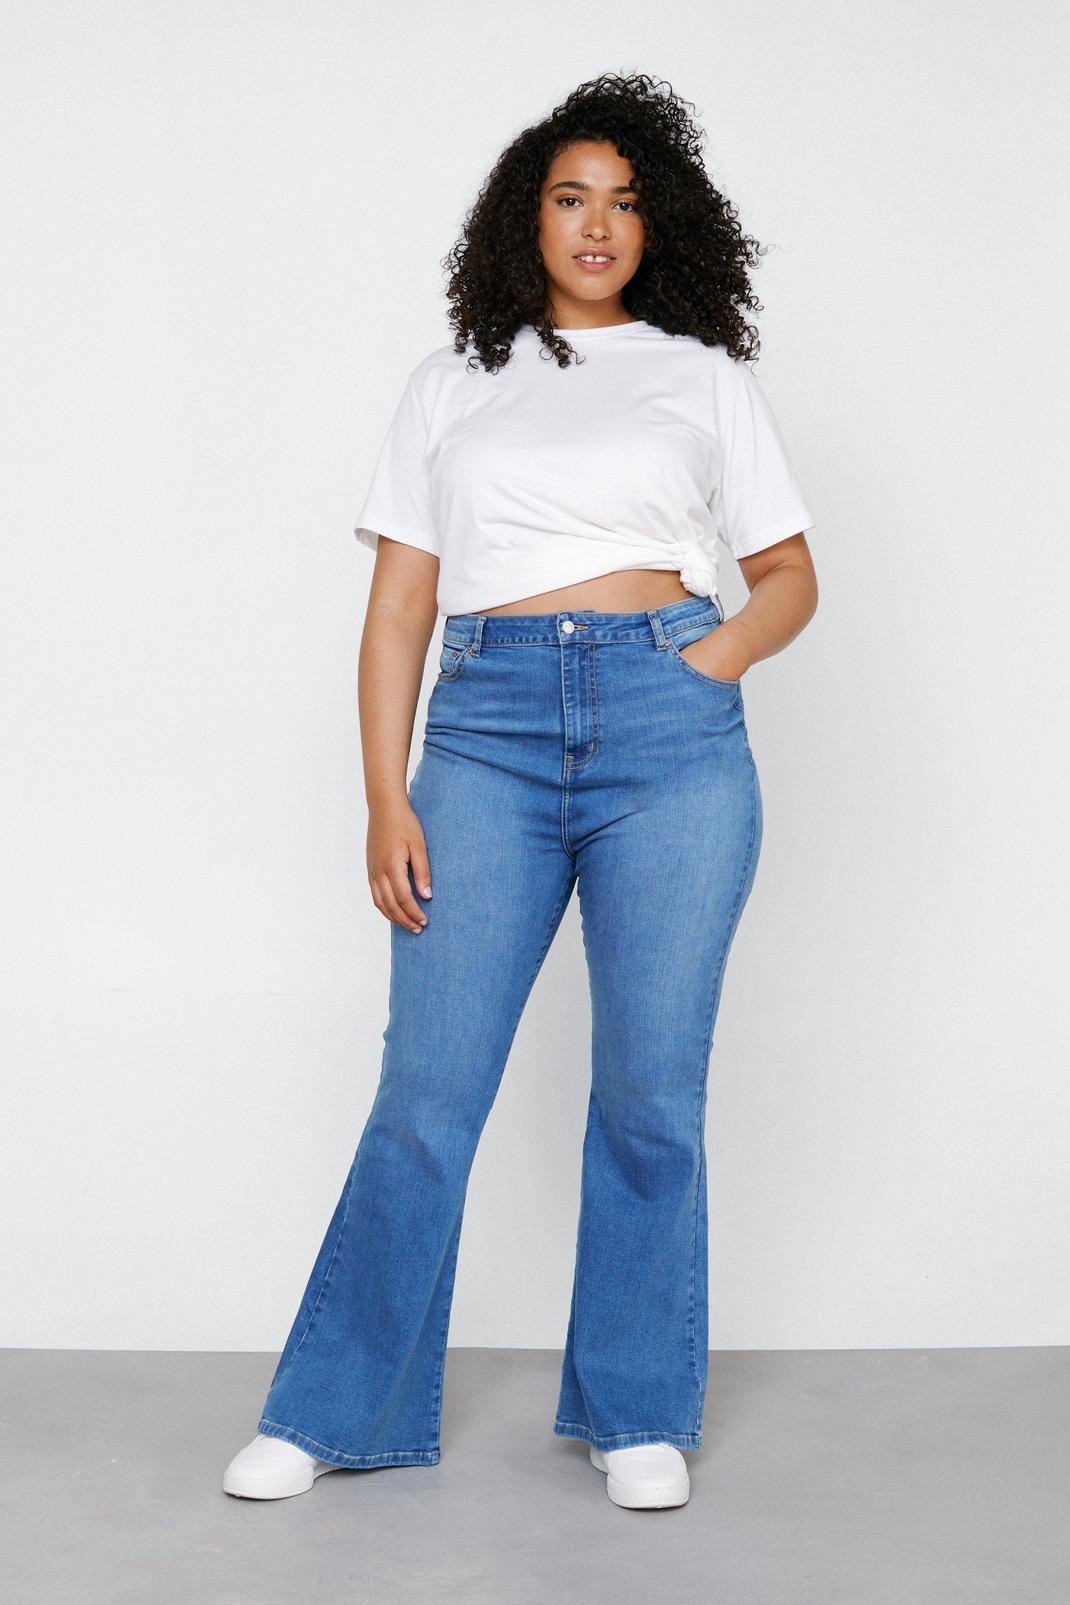 Plus Size Bell Bottom Jeans for Women High Waisted Classic Flared